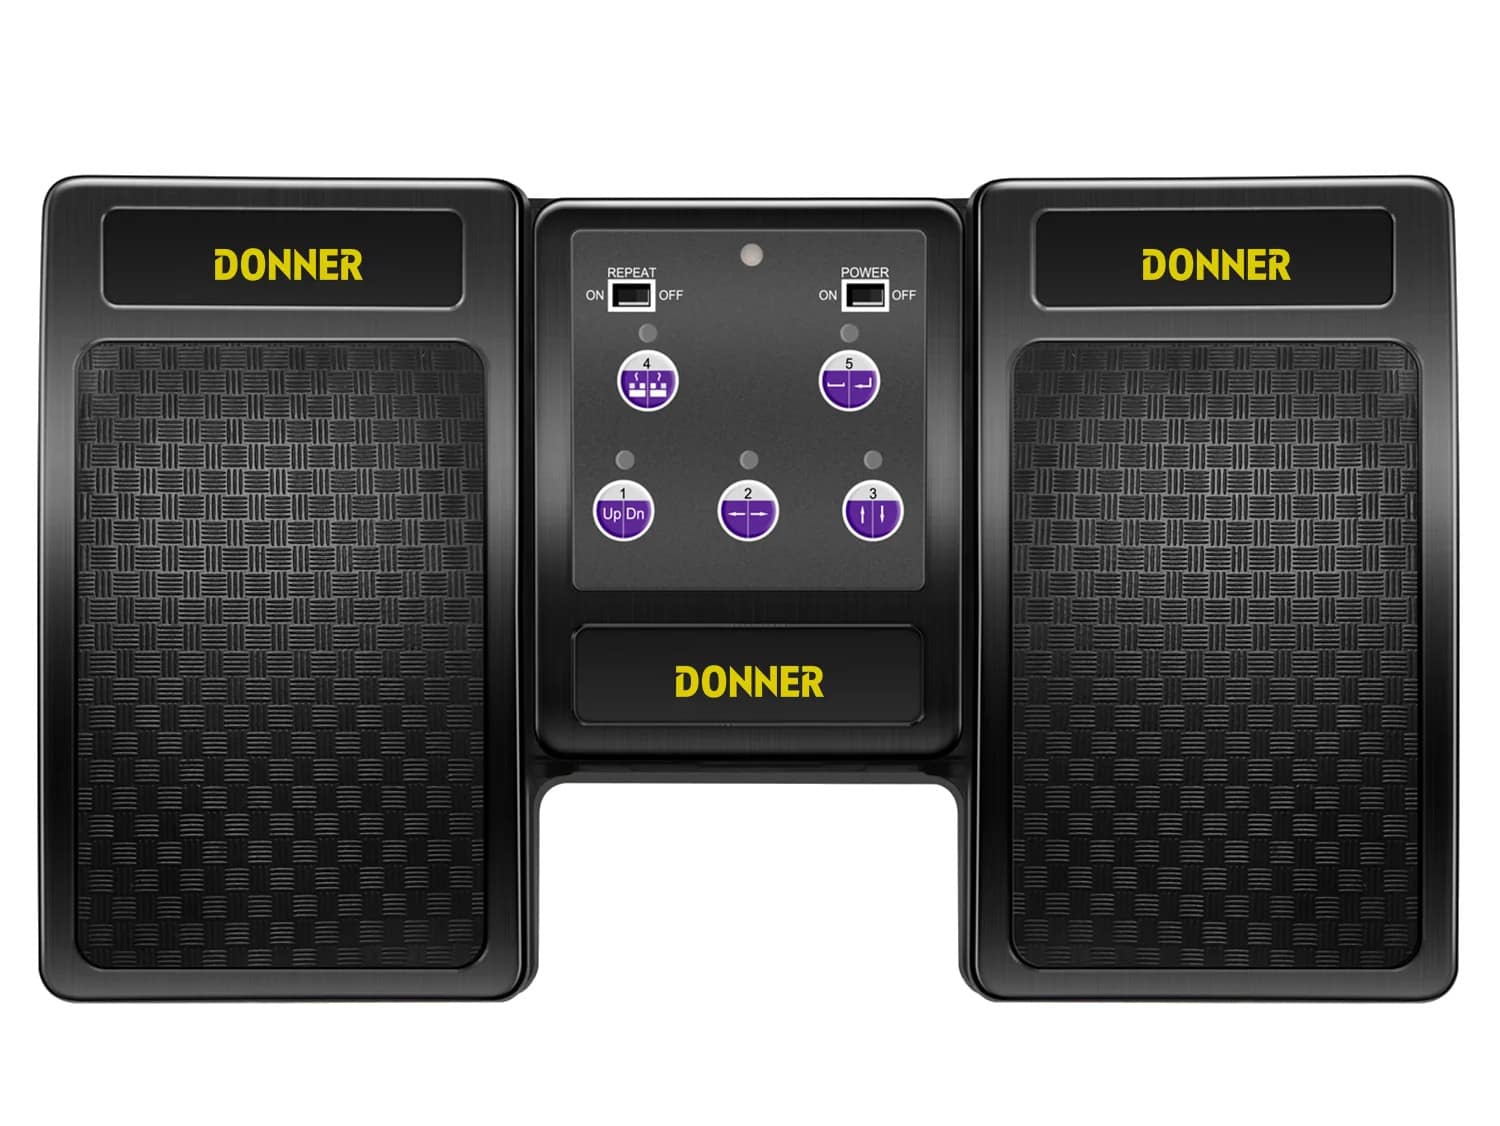 Donner Bluetooth Pedal (page turner)